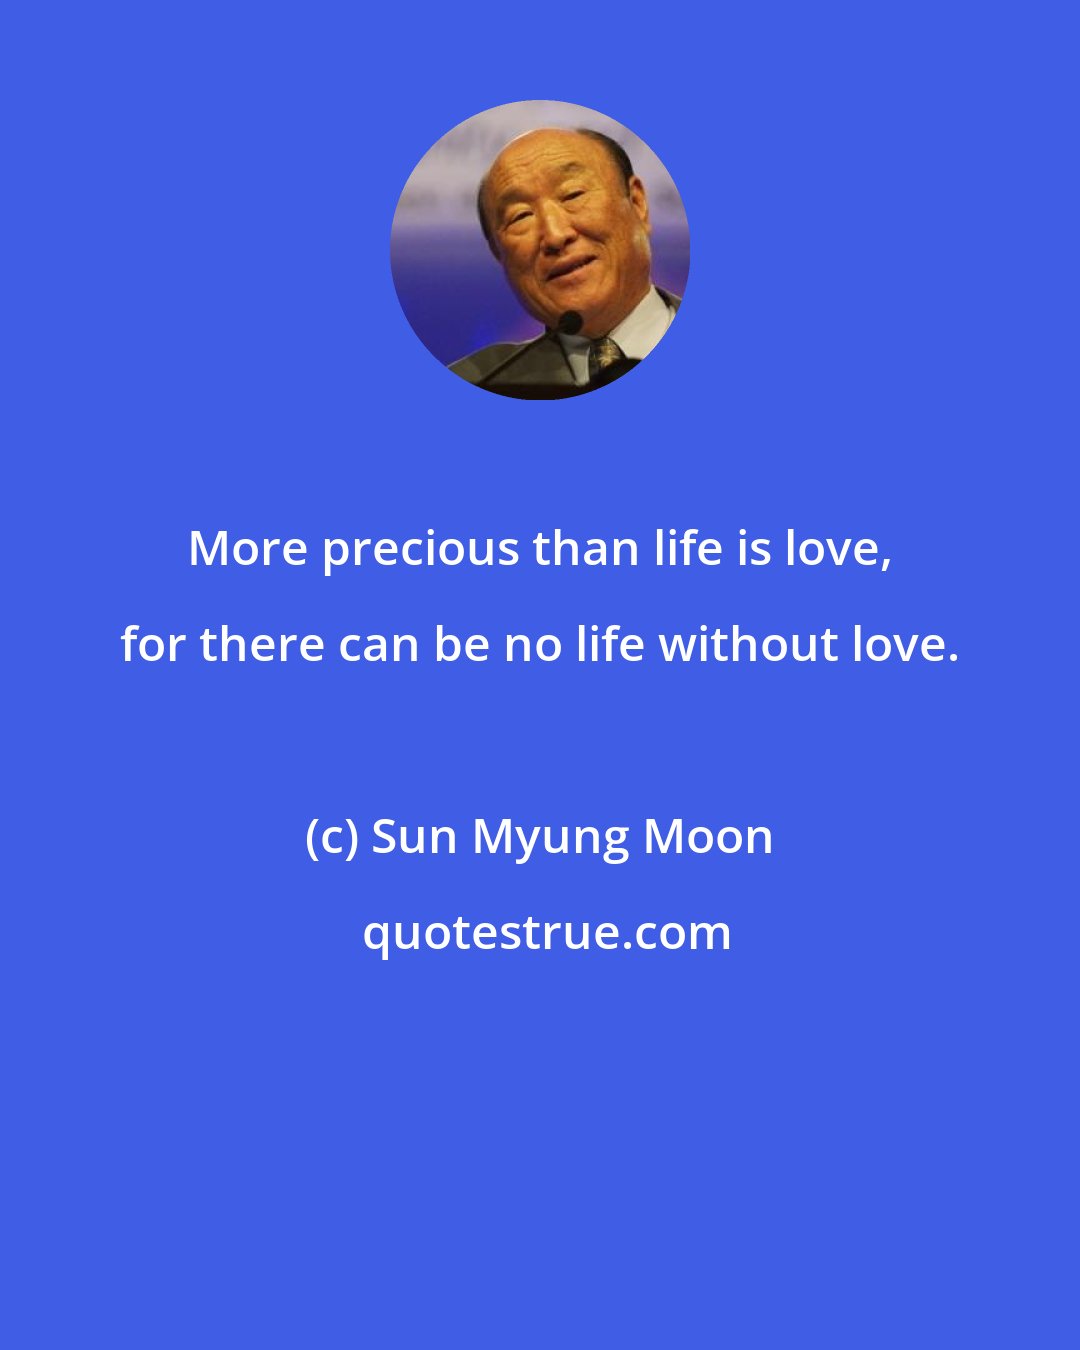 Sun Myung Moon: More precious than life is love, for there can be no life without love.